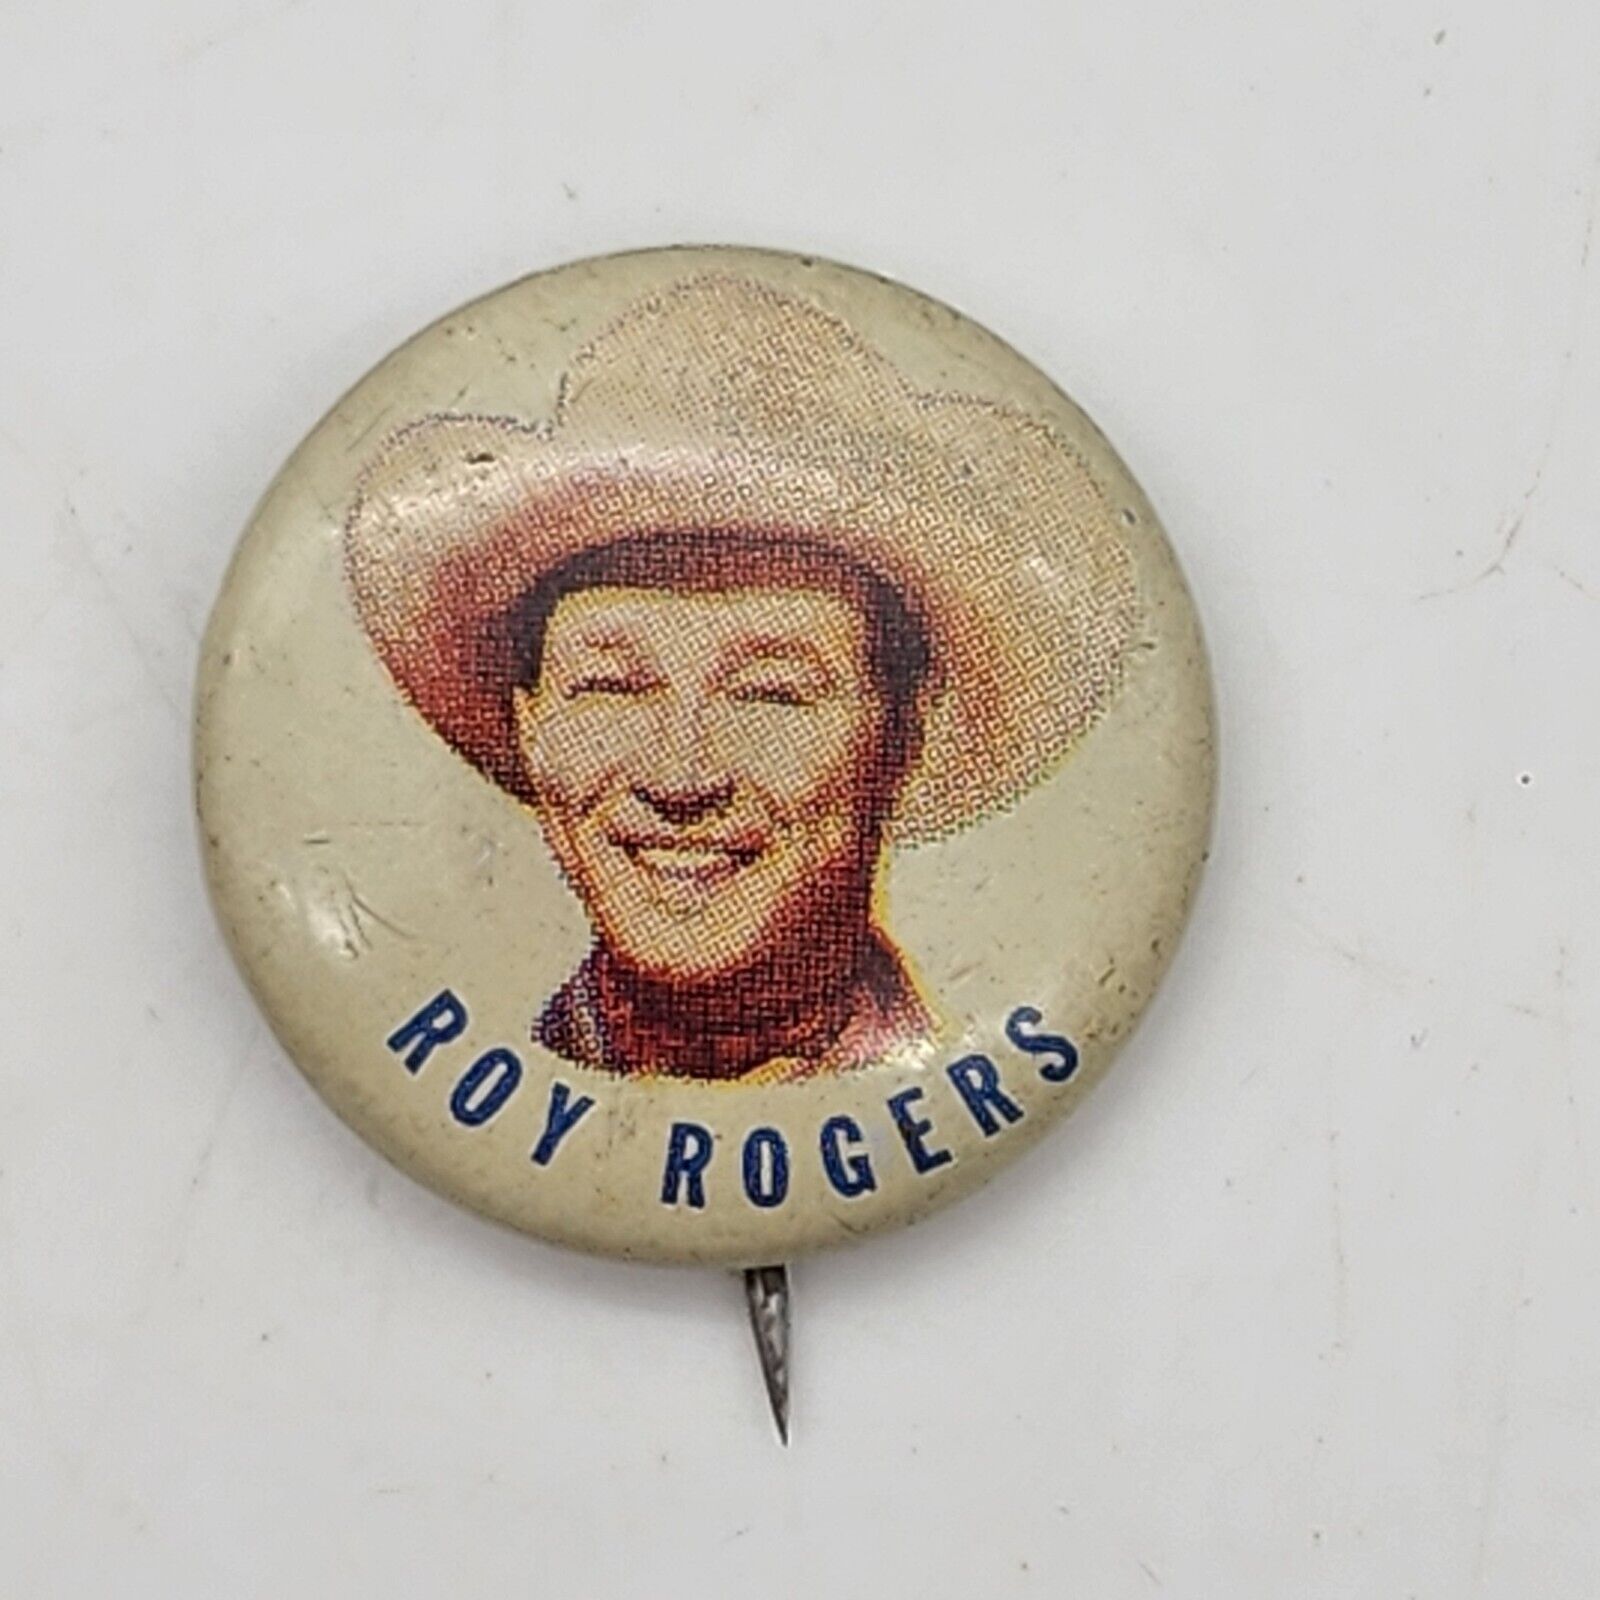 Roy Rogers pinback button midcentury Canadian Post Cereal free gift good cond